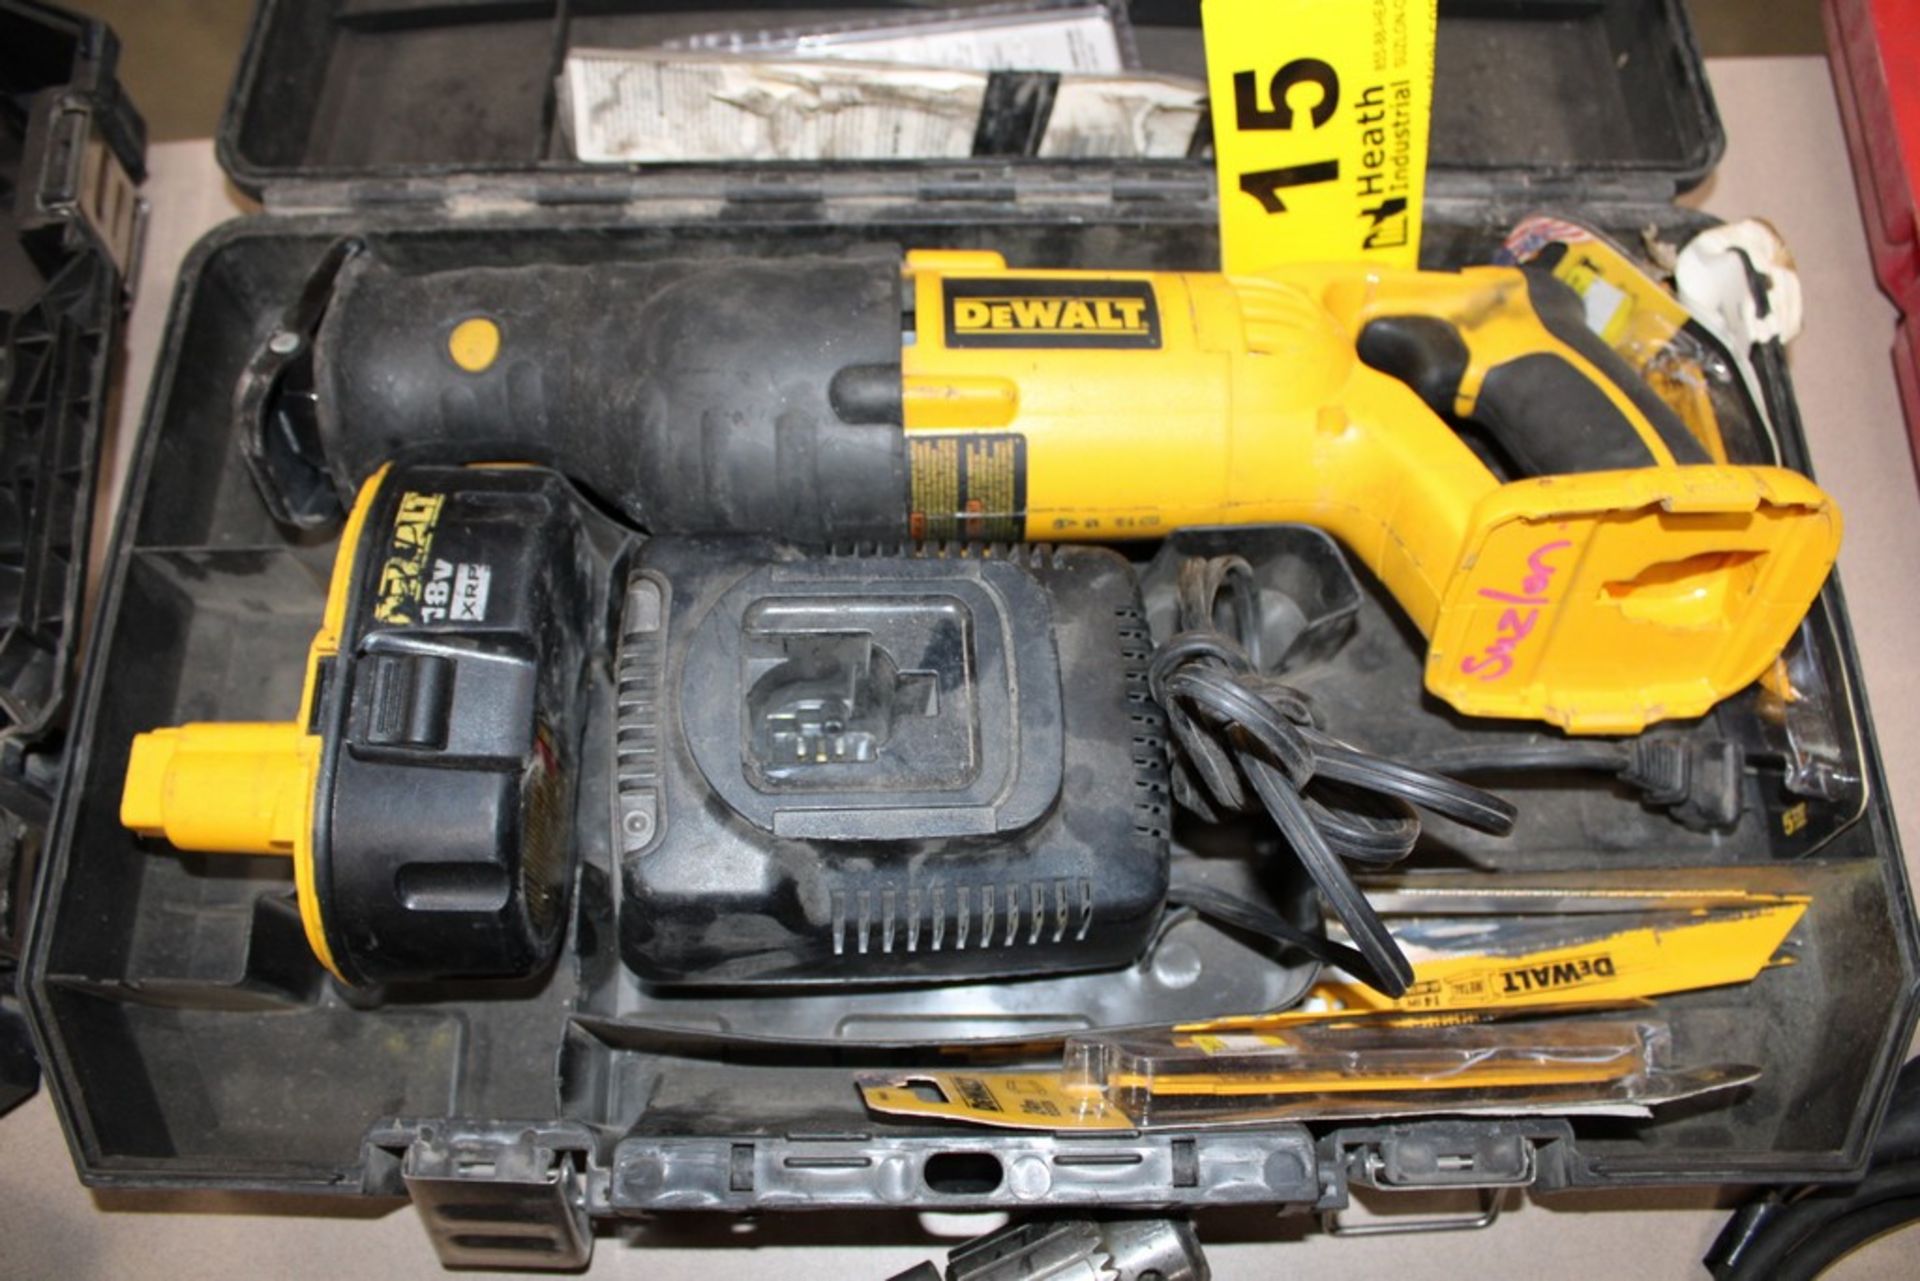 DEWALT MODEL DC385 CORDLESS RECIPROCATING SAW WITH BATTERY, CHARGER AND CASE